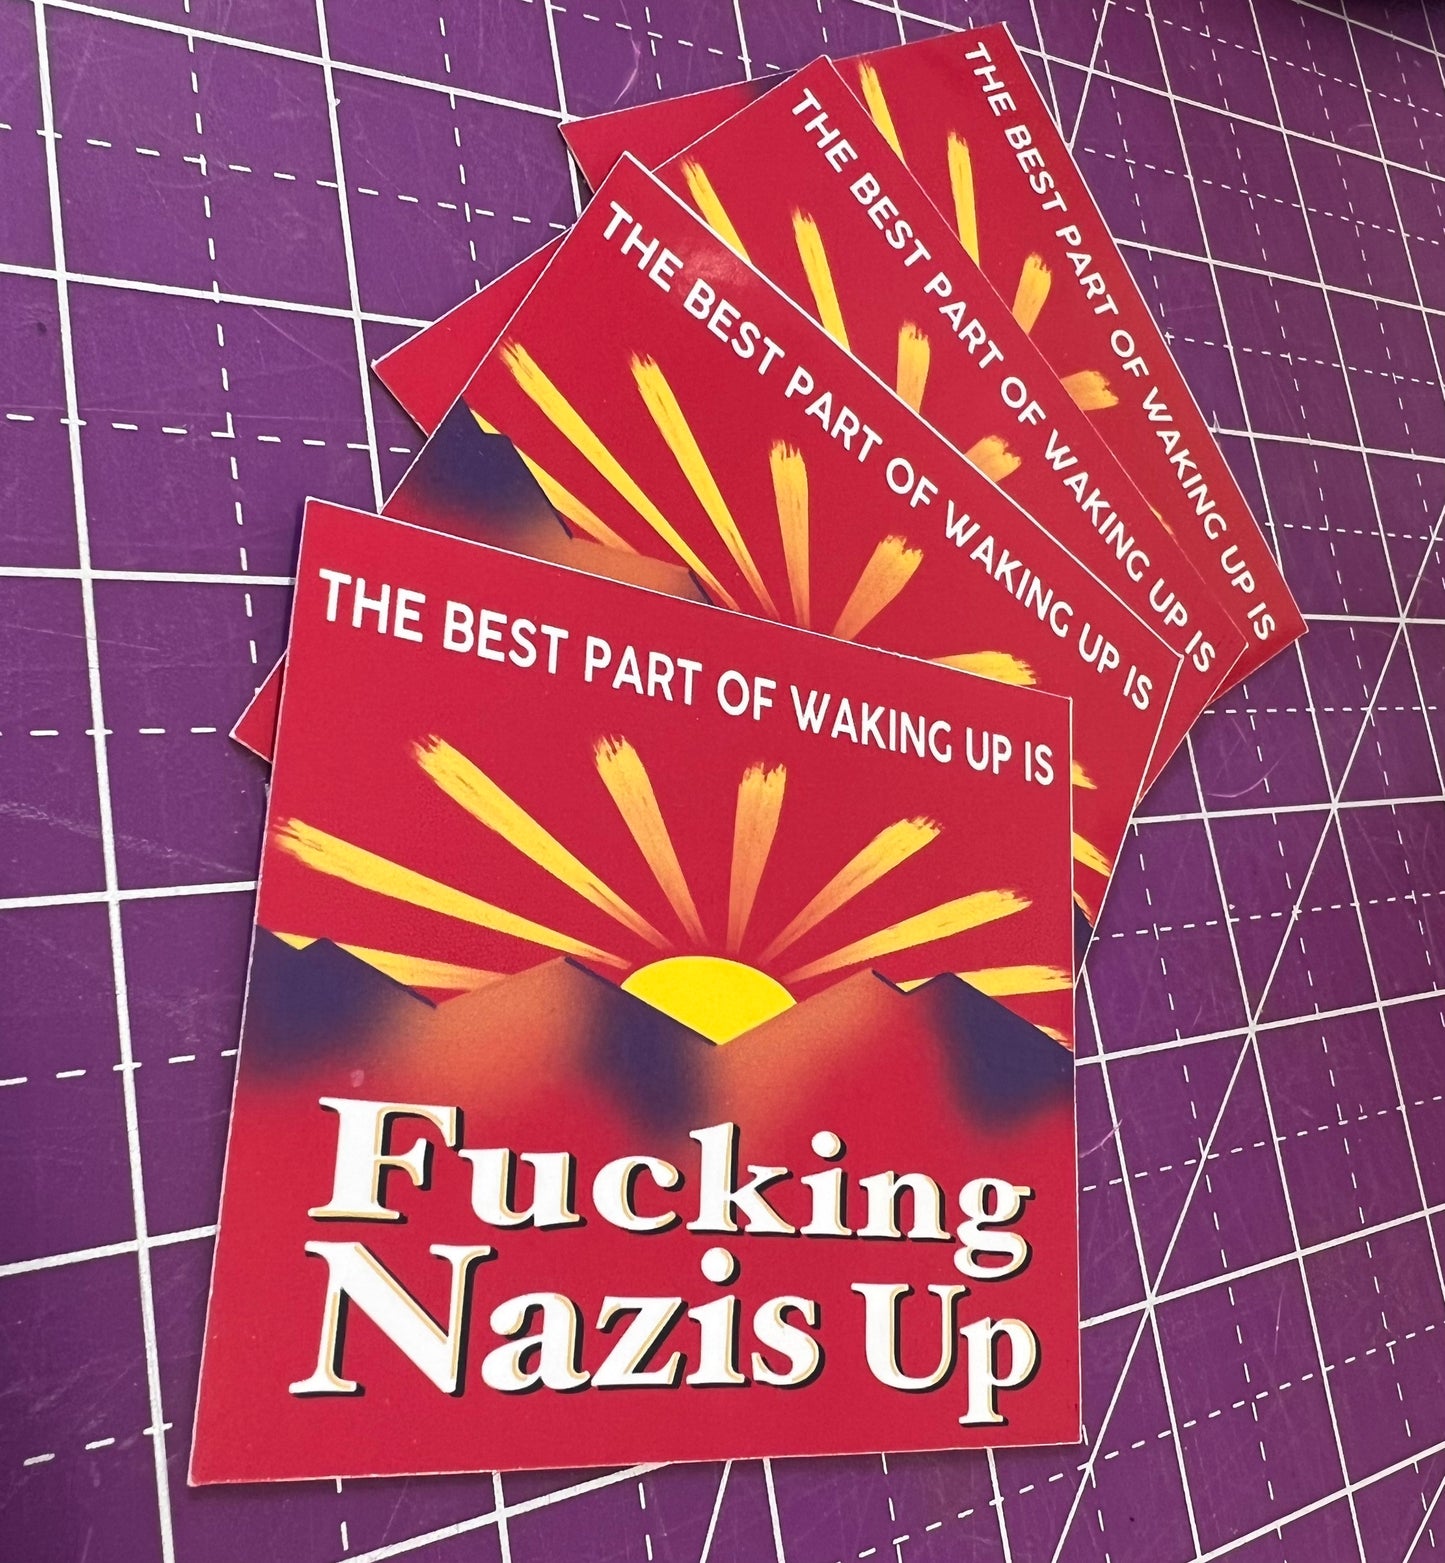 Best Part of Waking Up is F#cking Nazis Up Sticker